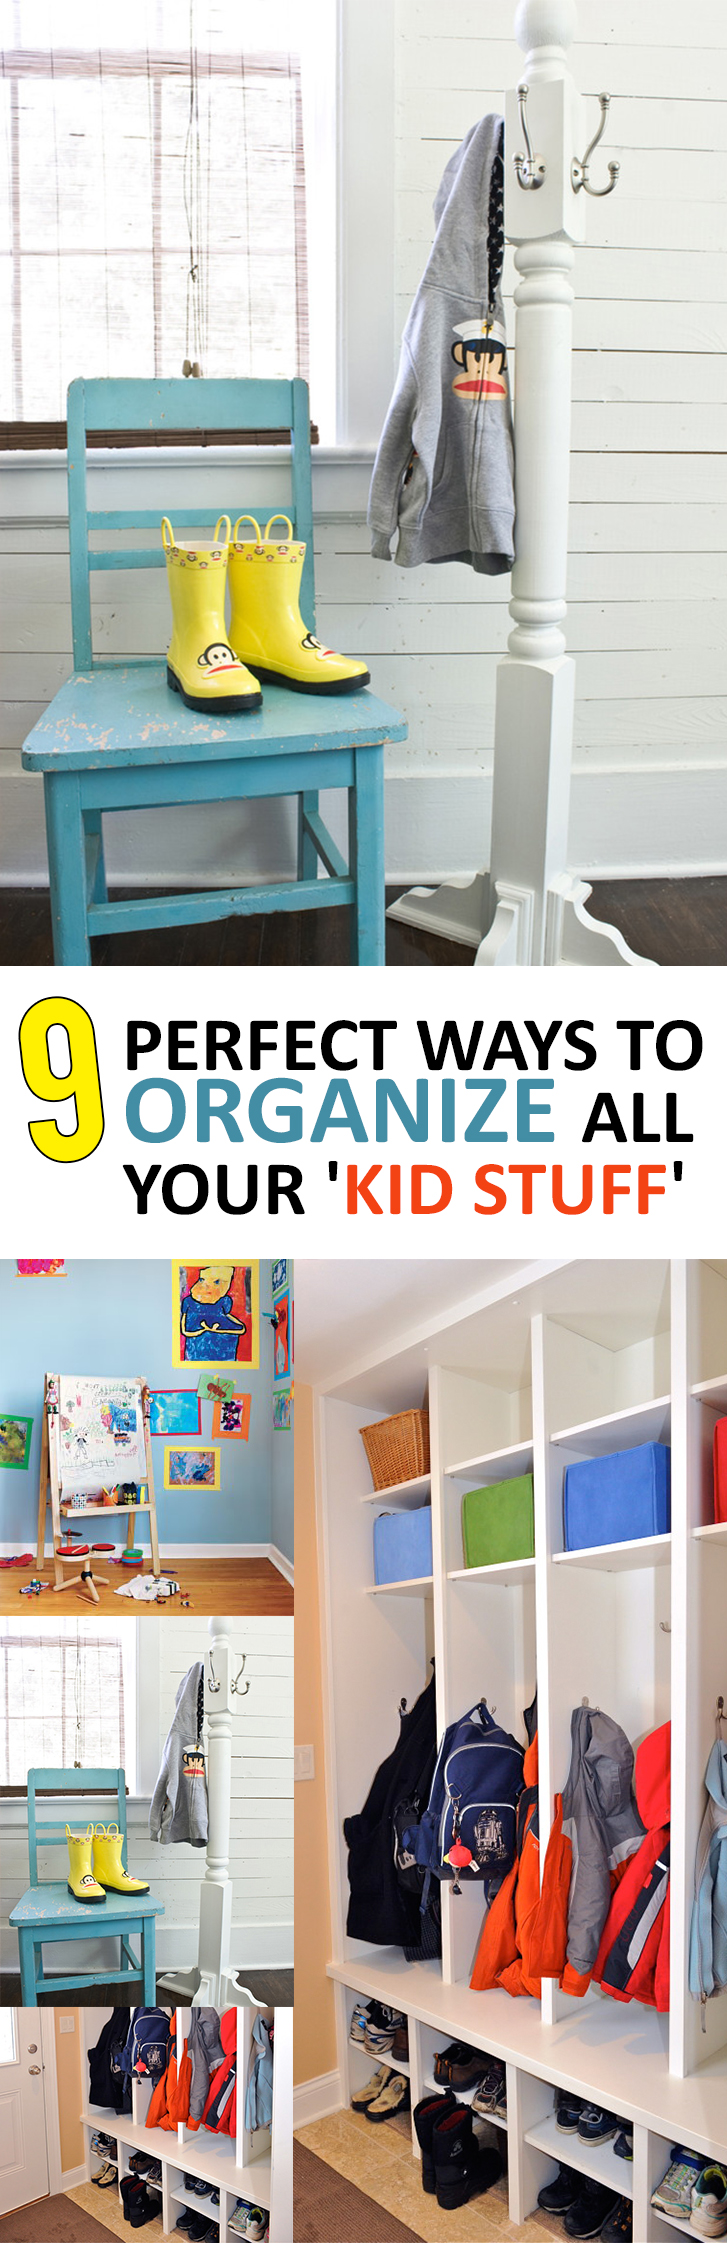 9 Perfect Ways to Organize all your 'Kid Stuff'